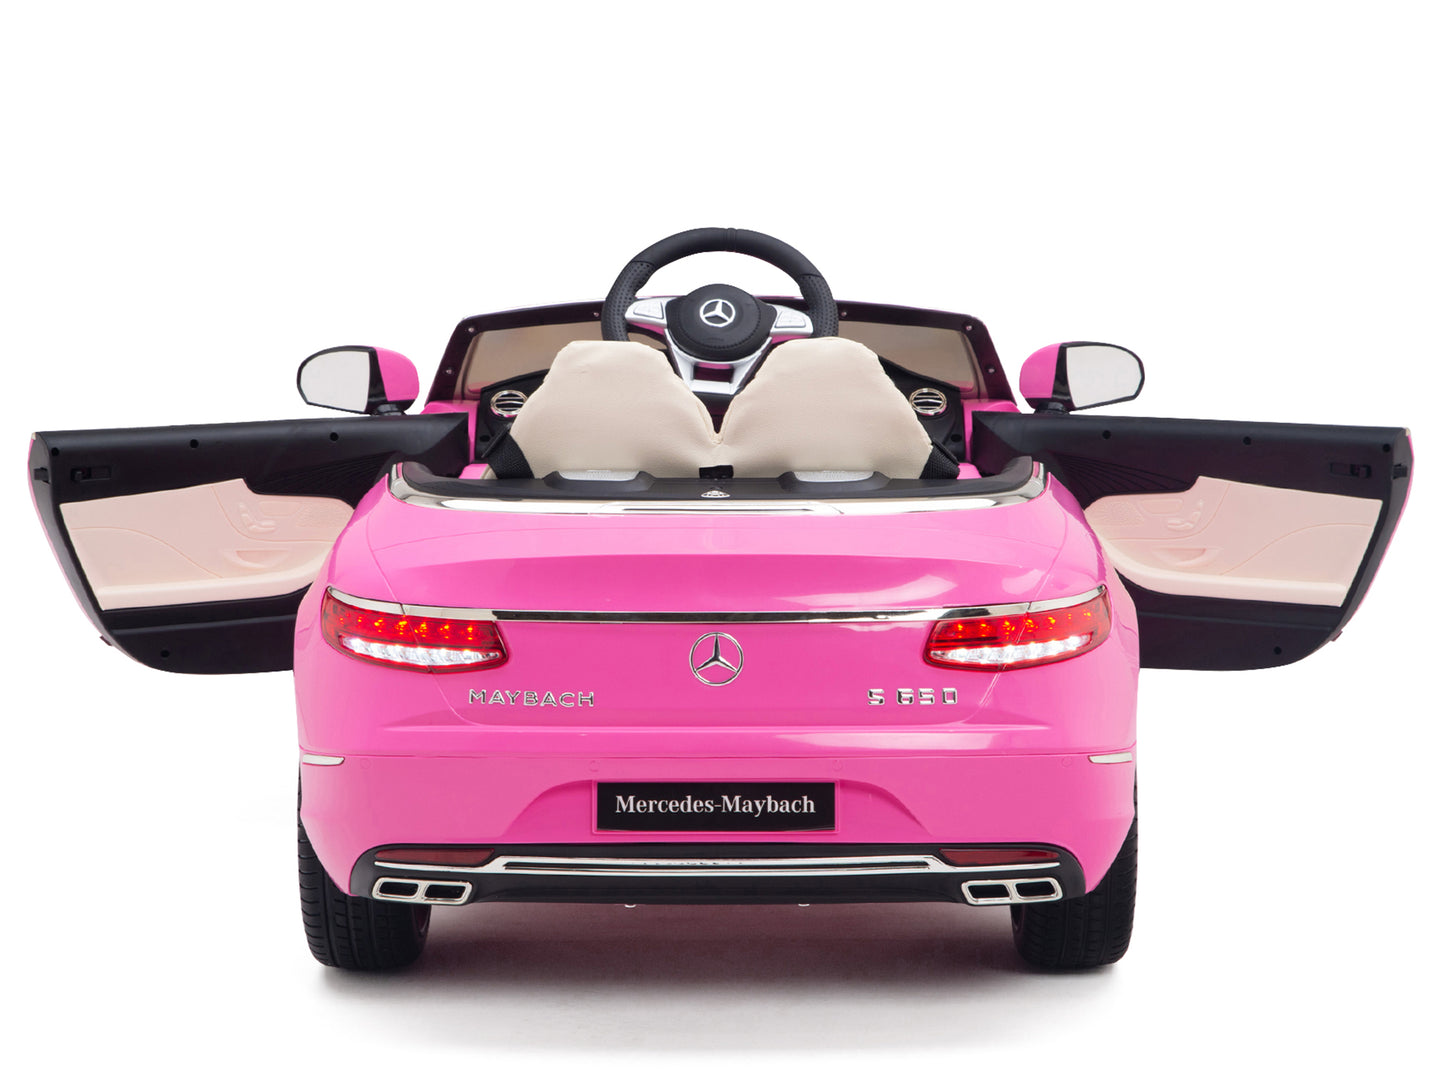 12V Mercedes-Benz Maybach Kids Electric Powered Ride on Car With Remote Control, Radio & MP3 - Pink